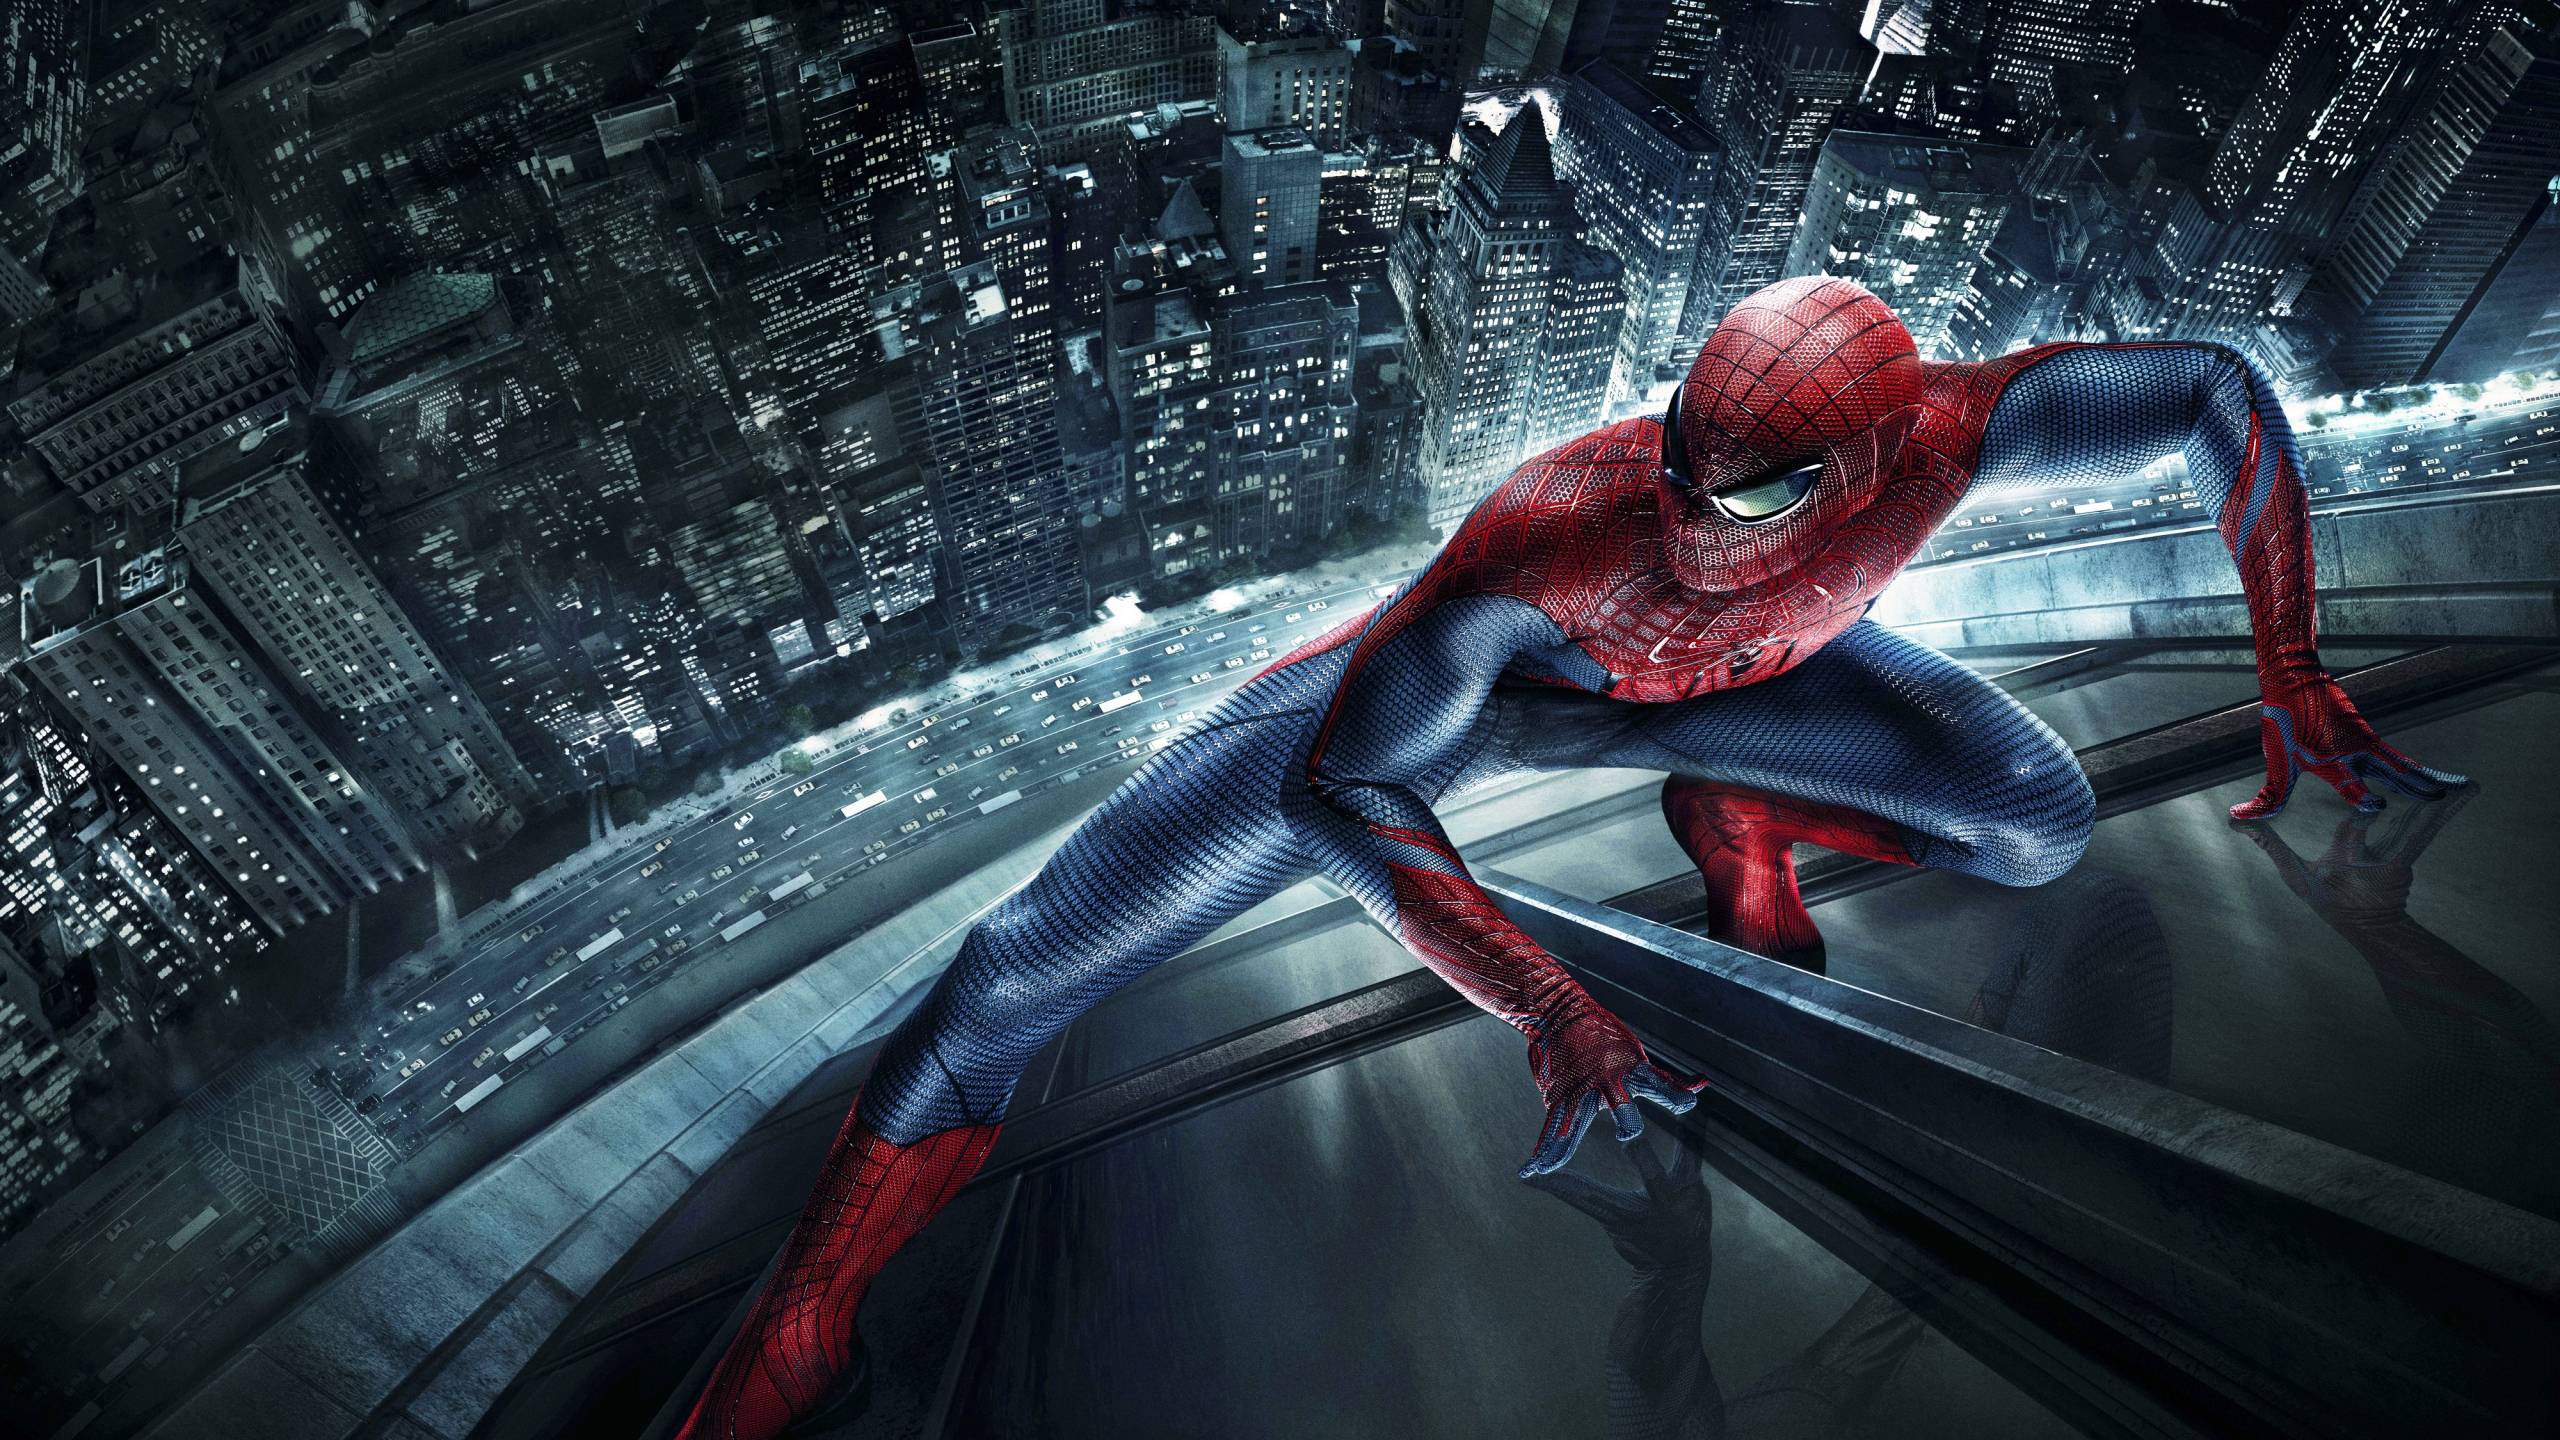 Peter Parker Amazing Spider Man wallpaper for your iMac. HD